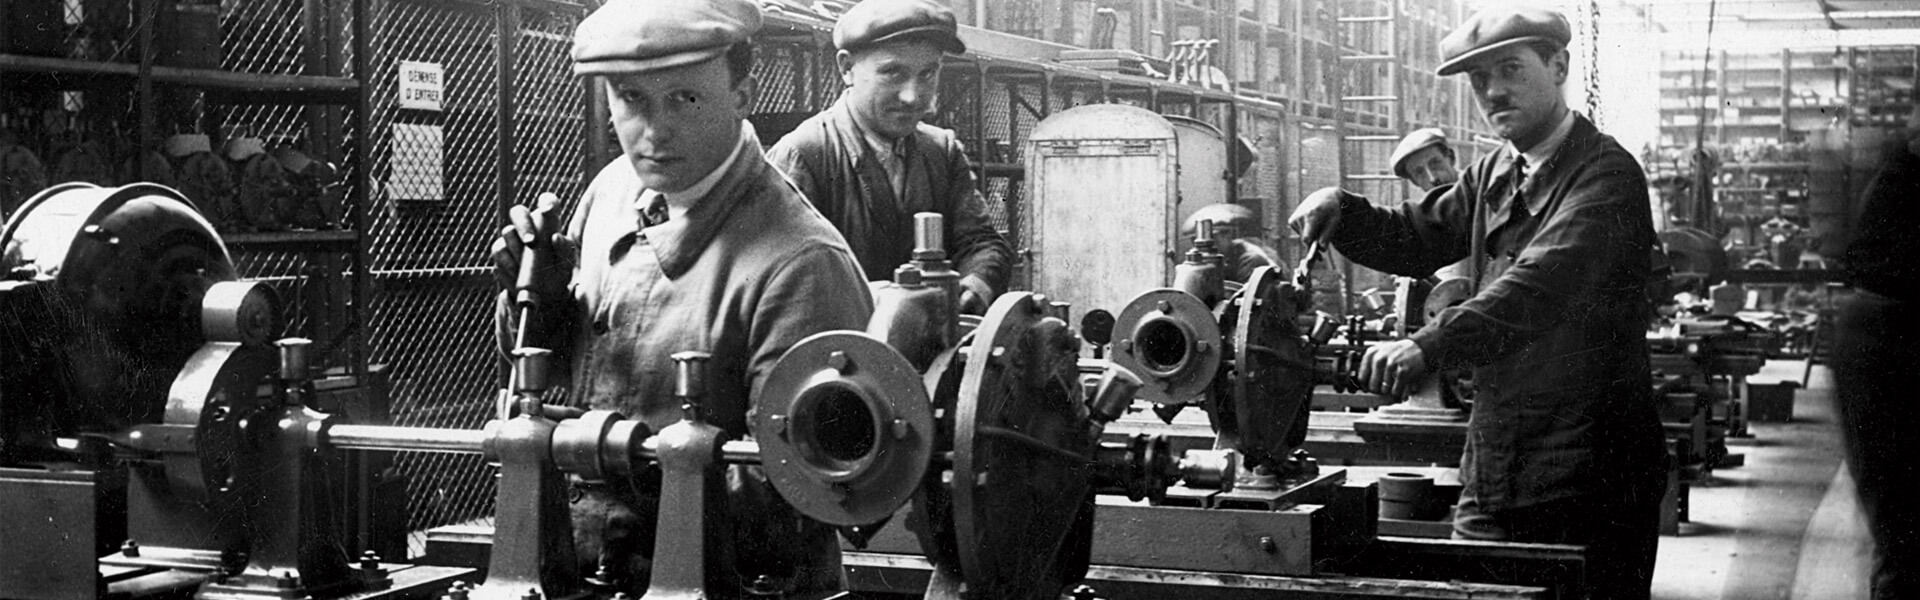 Workers in factory